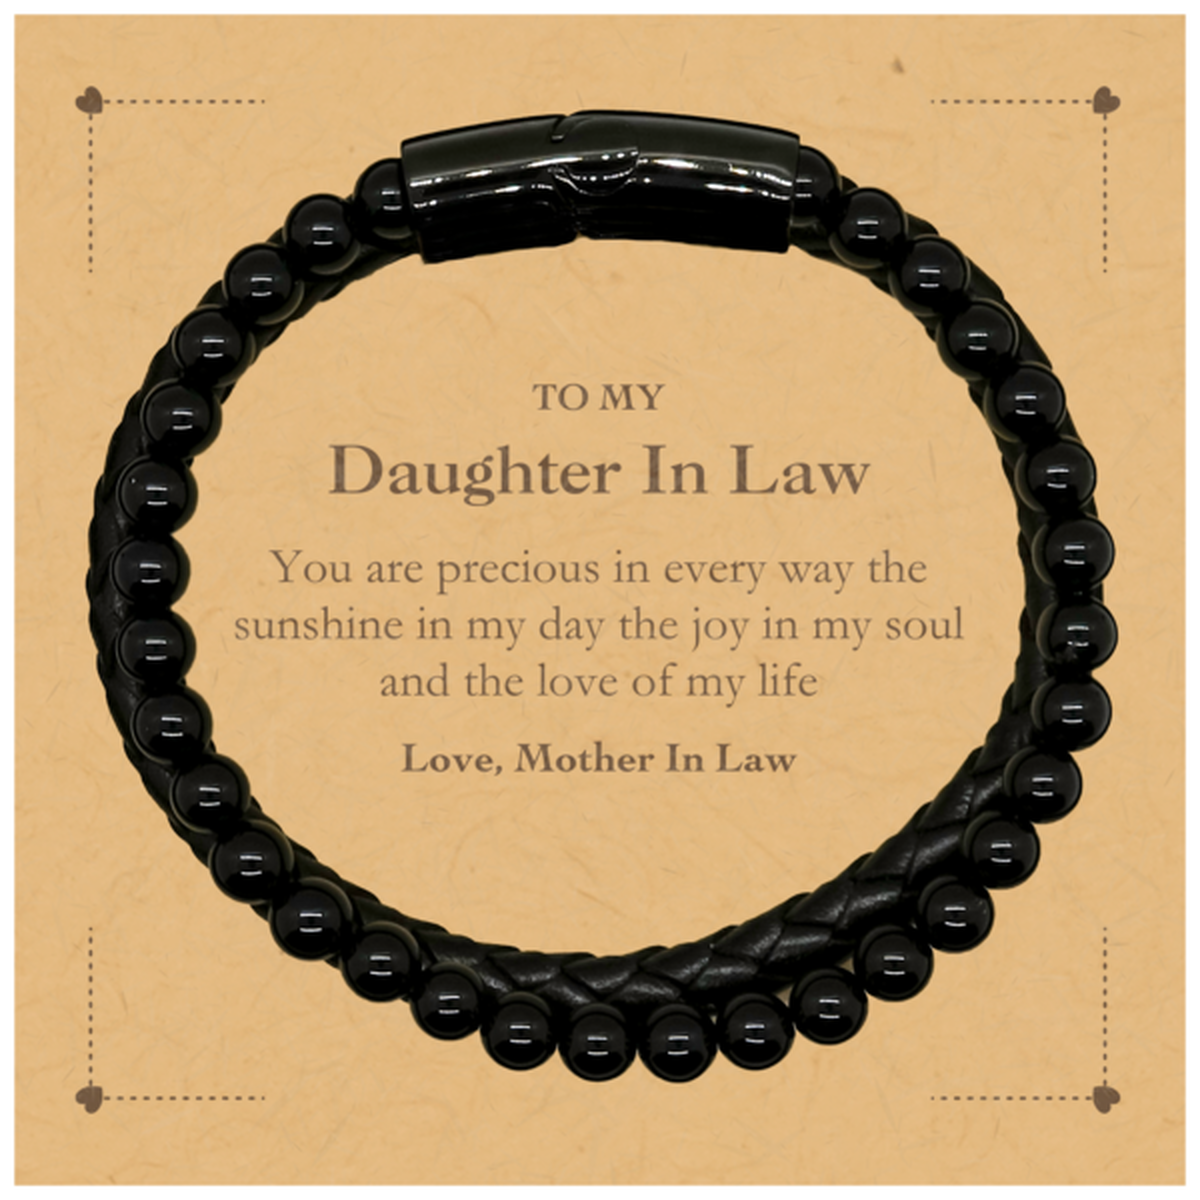 Graduation Gifts for Daughter In Law Stone Leather Bracelets Present from Mother In Law, Christmas Daughter In Law Birthday Gifts Daughter In Law You are precious in every way the sunshine in my day. Love, Mother In Law